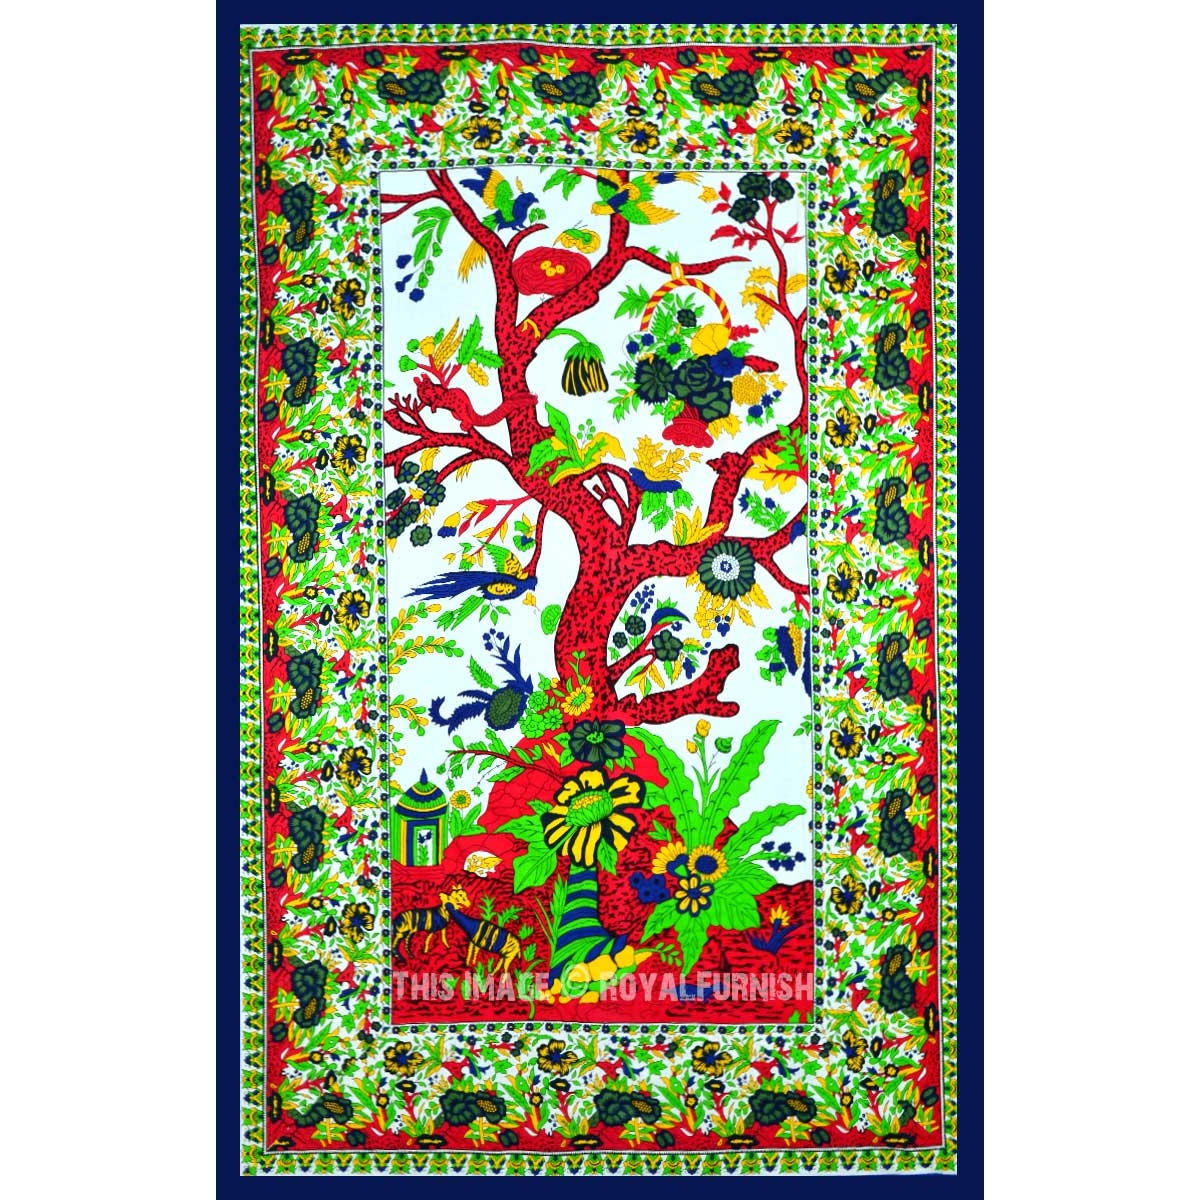 E-Tailor 120 TC Tree of Life Decorative Ethnic Tapestry Wall Hanging Hippie Mandala Bohemian Tapestries Red 90x108 Inch Manglam International STP-TREE-RED 